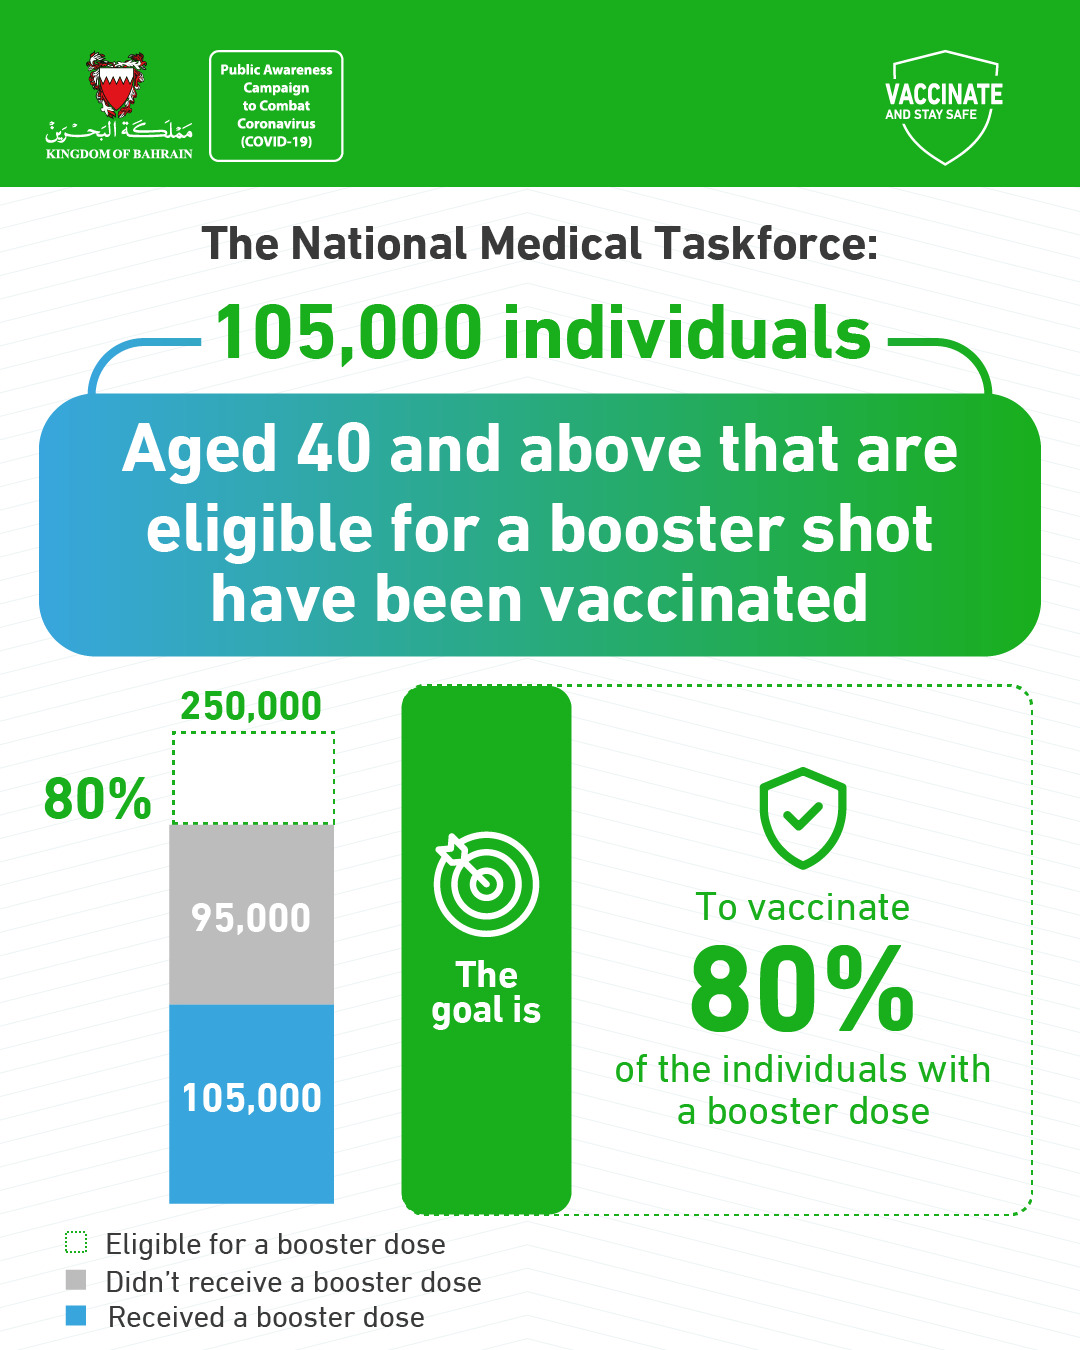 The National Medical Taskforce for Combatting COVID-19: the goal is to administer booster shots to 95,000 individuals aged 40 and above to reach a target of 80%